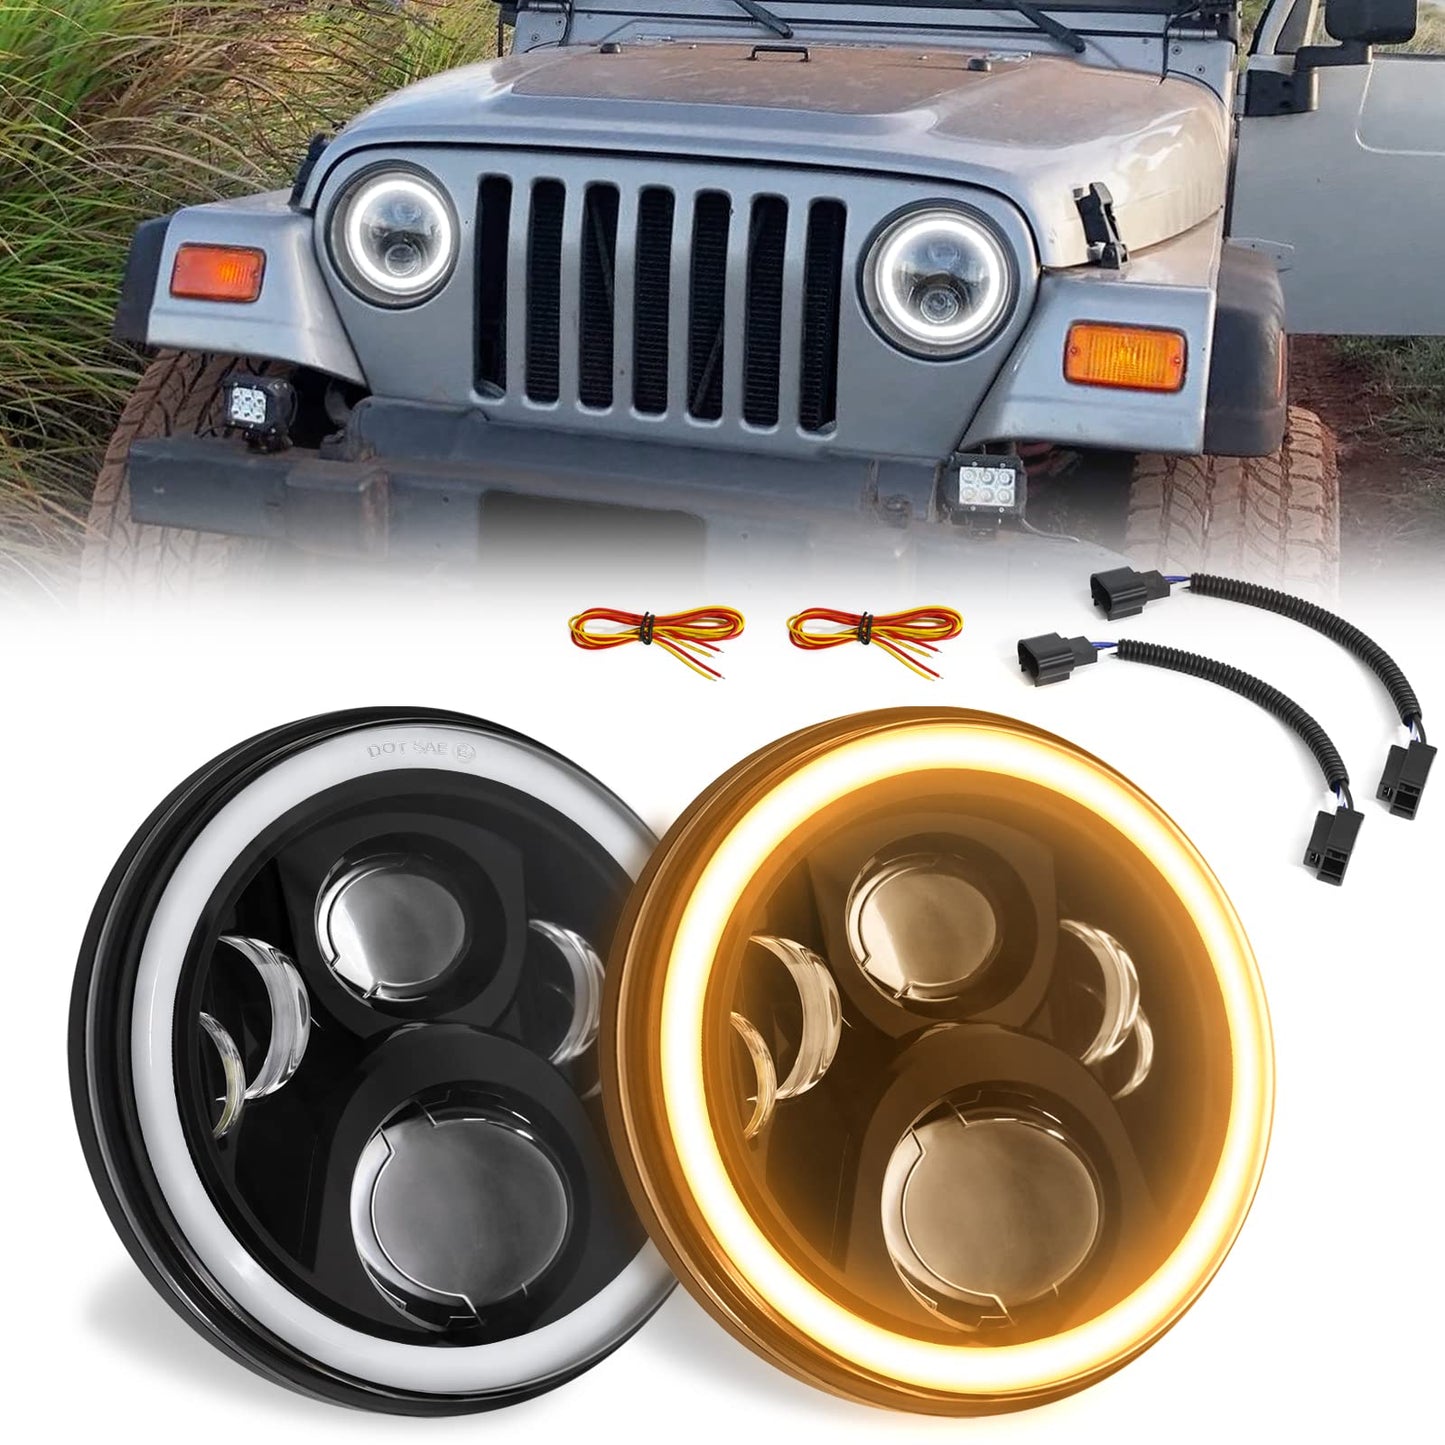 Haitzu 7 inch Led Round Black Hi/lo Sealed Beam headlight DOT Approved  Compatible with Jeep Wrangler JK Hummer H1 H2 ,Halo with Amber Turn Light 